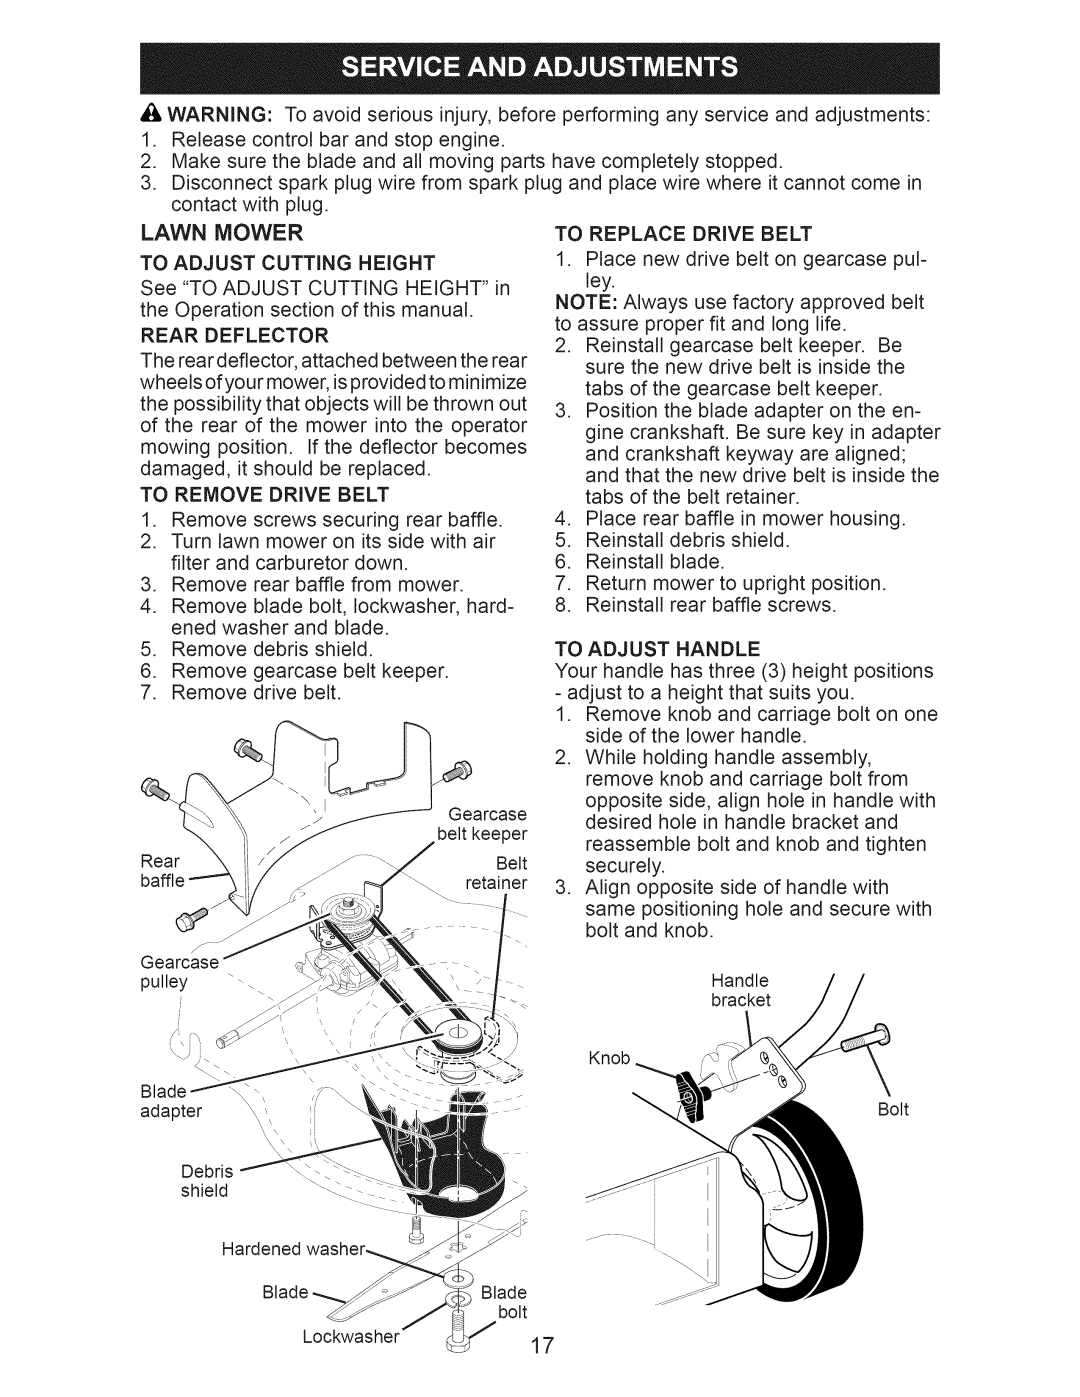 Craftsman 917.374363 manual contact with plug, Lawn Mower 